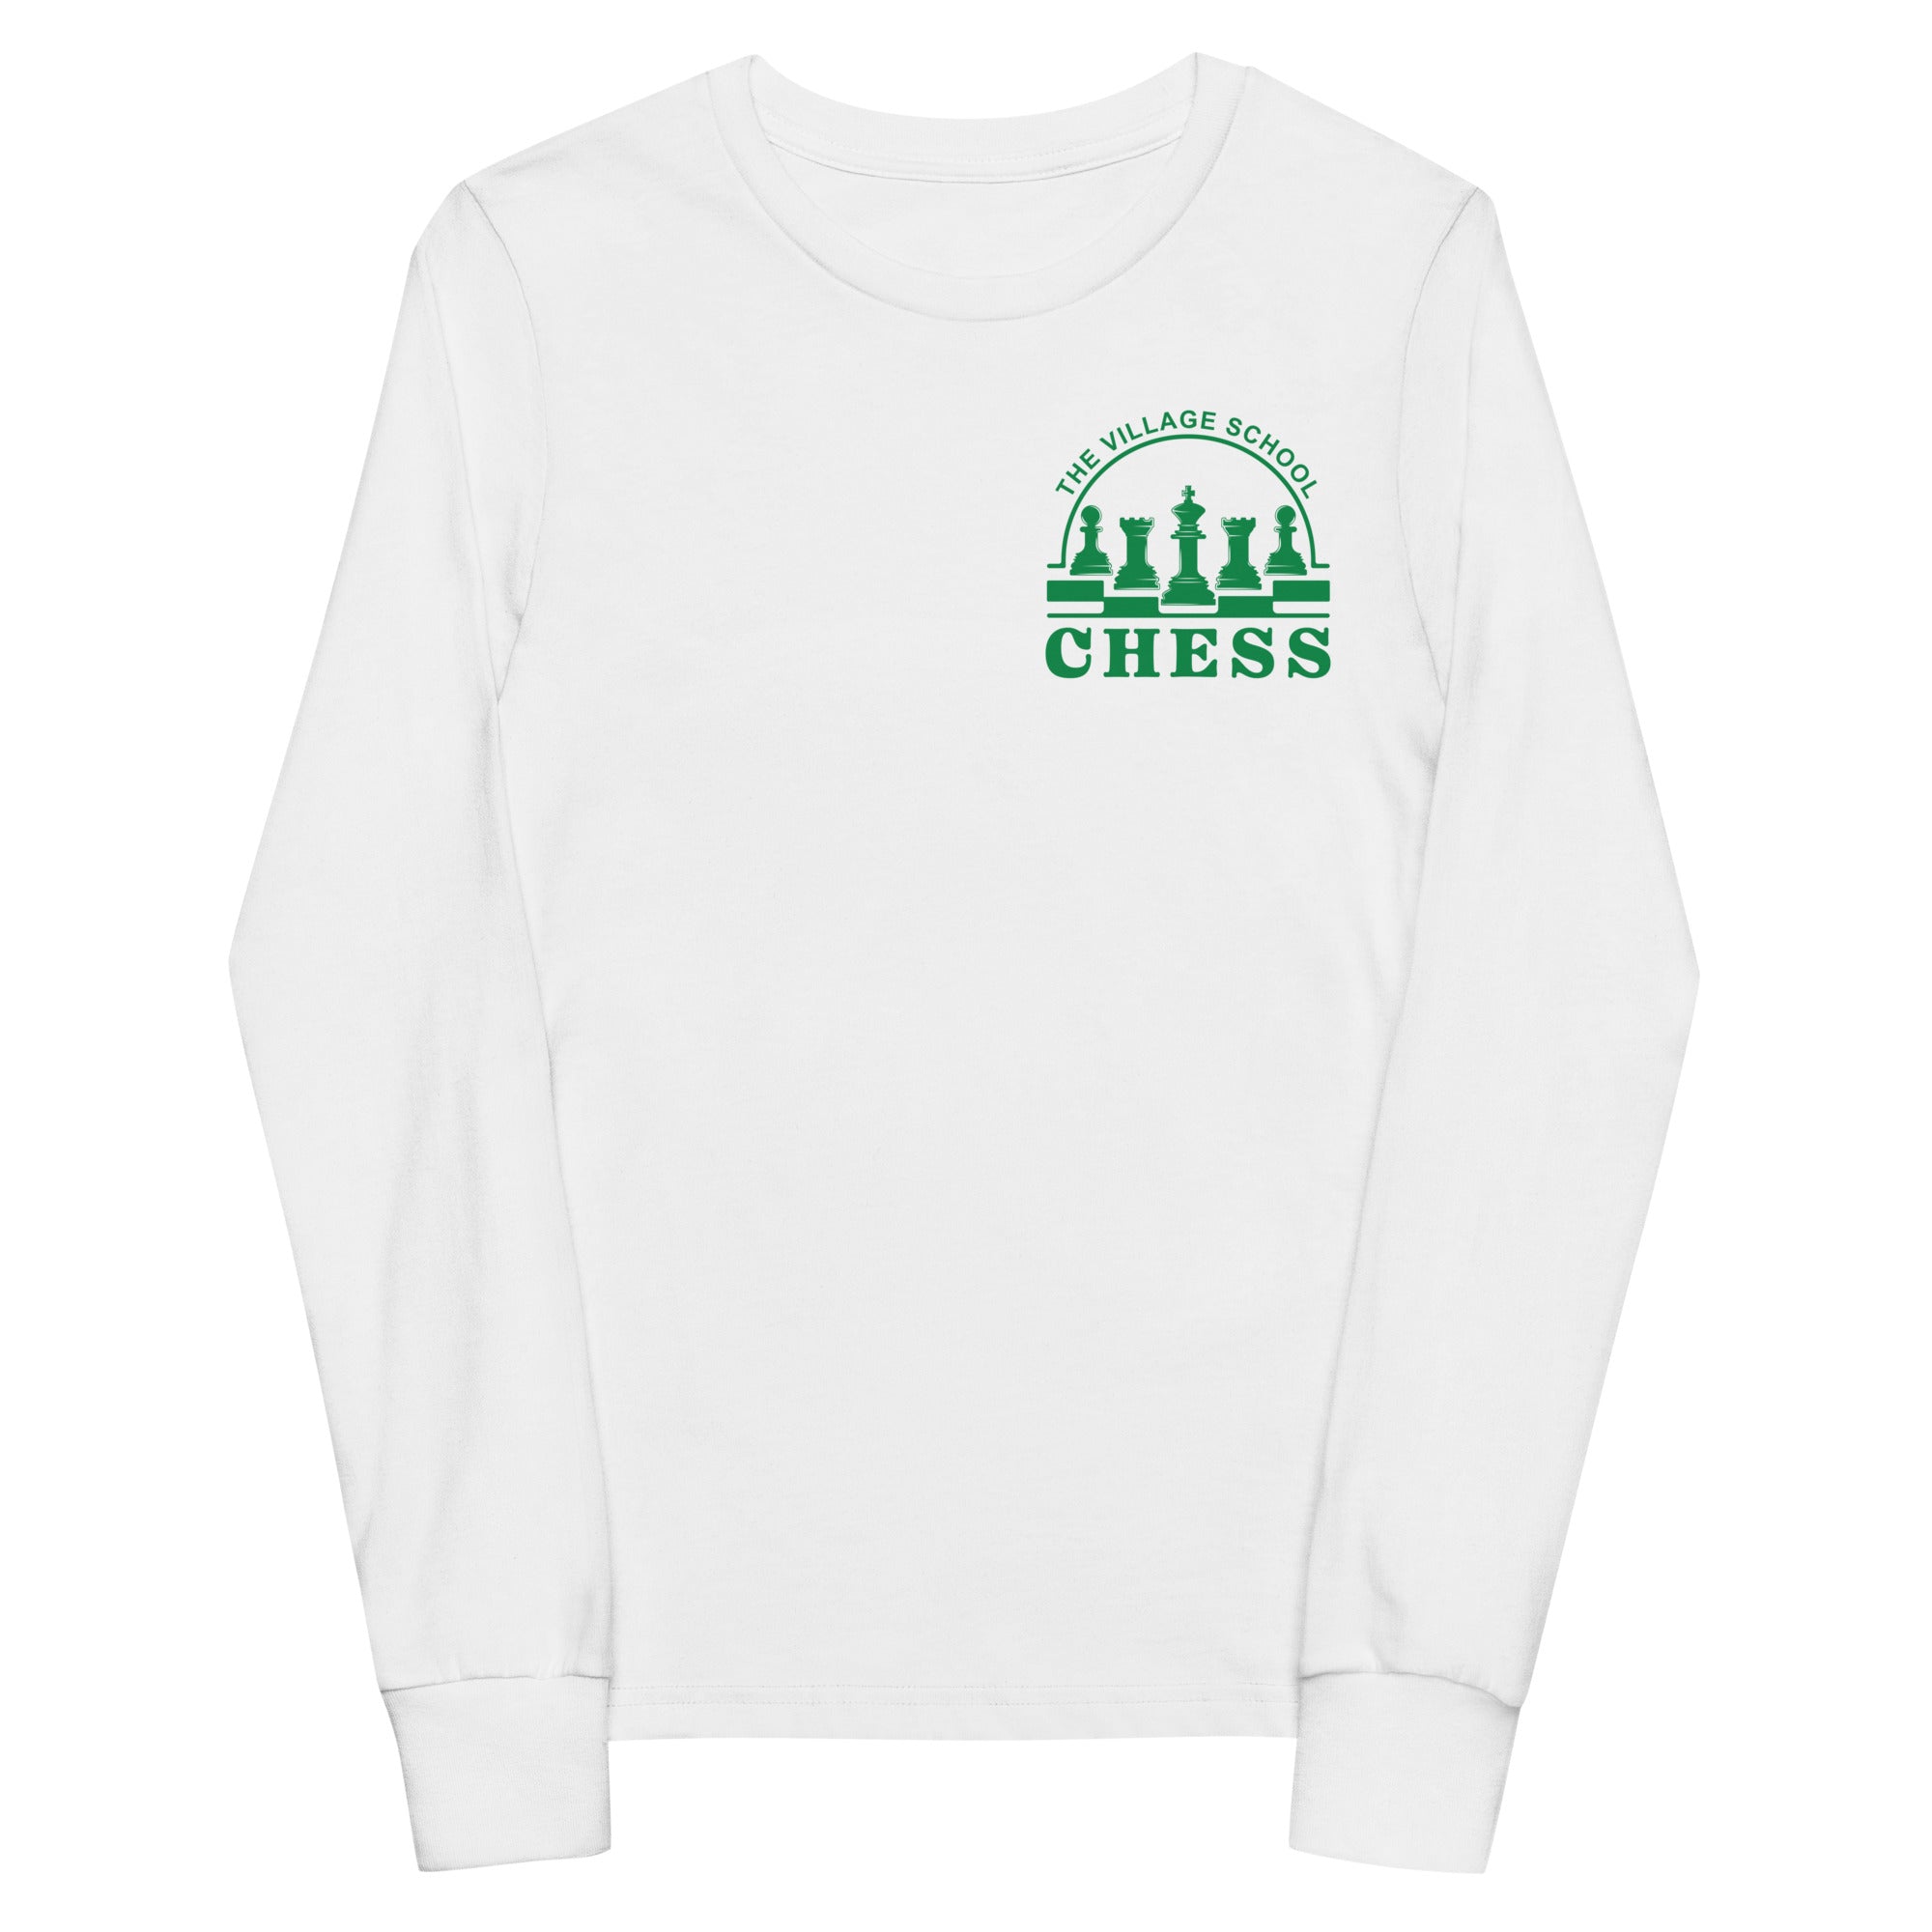 The Village School Chess Youth long sleeve tee